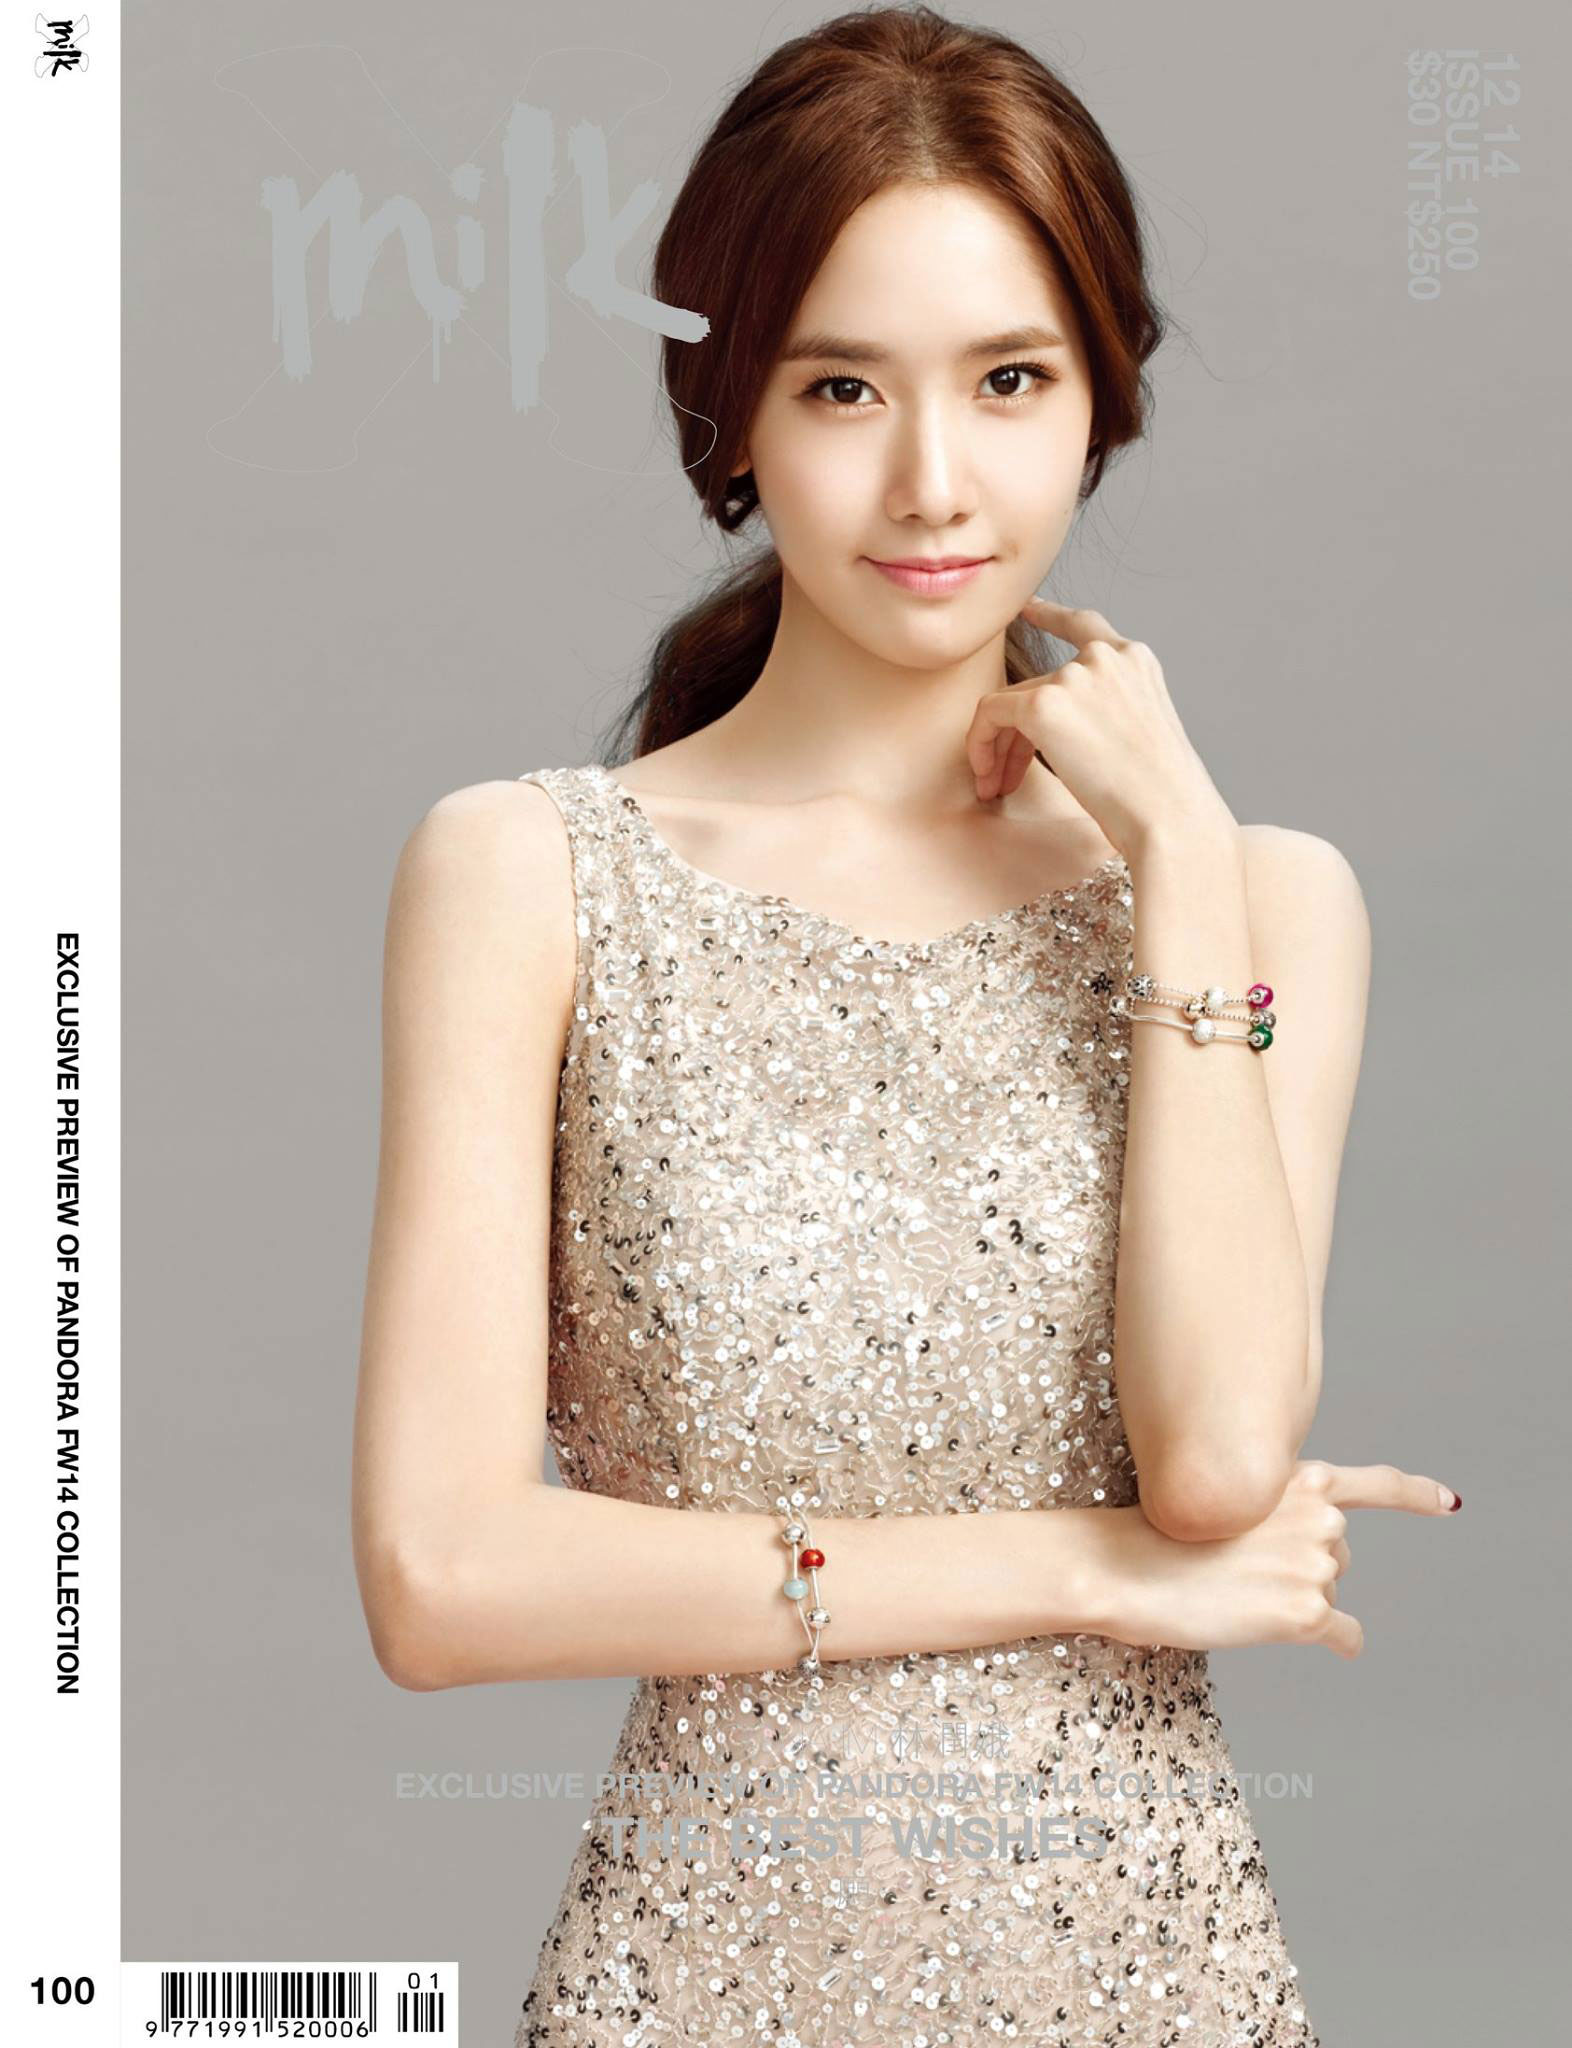 Yoona Attended A Pandora Gala Dinner In September From Her Hair